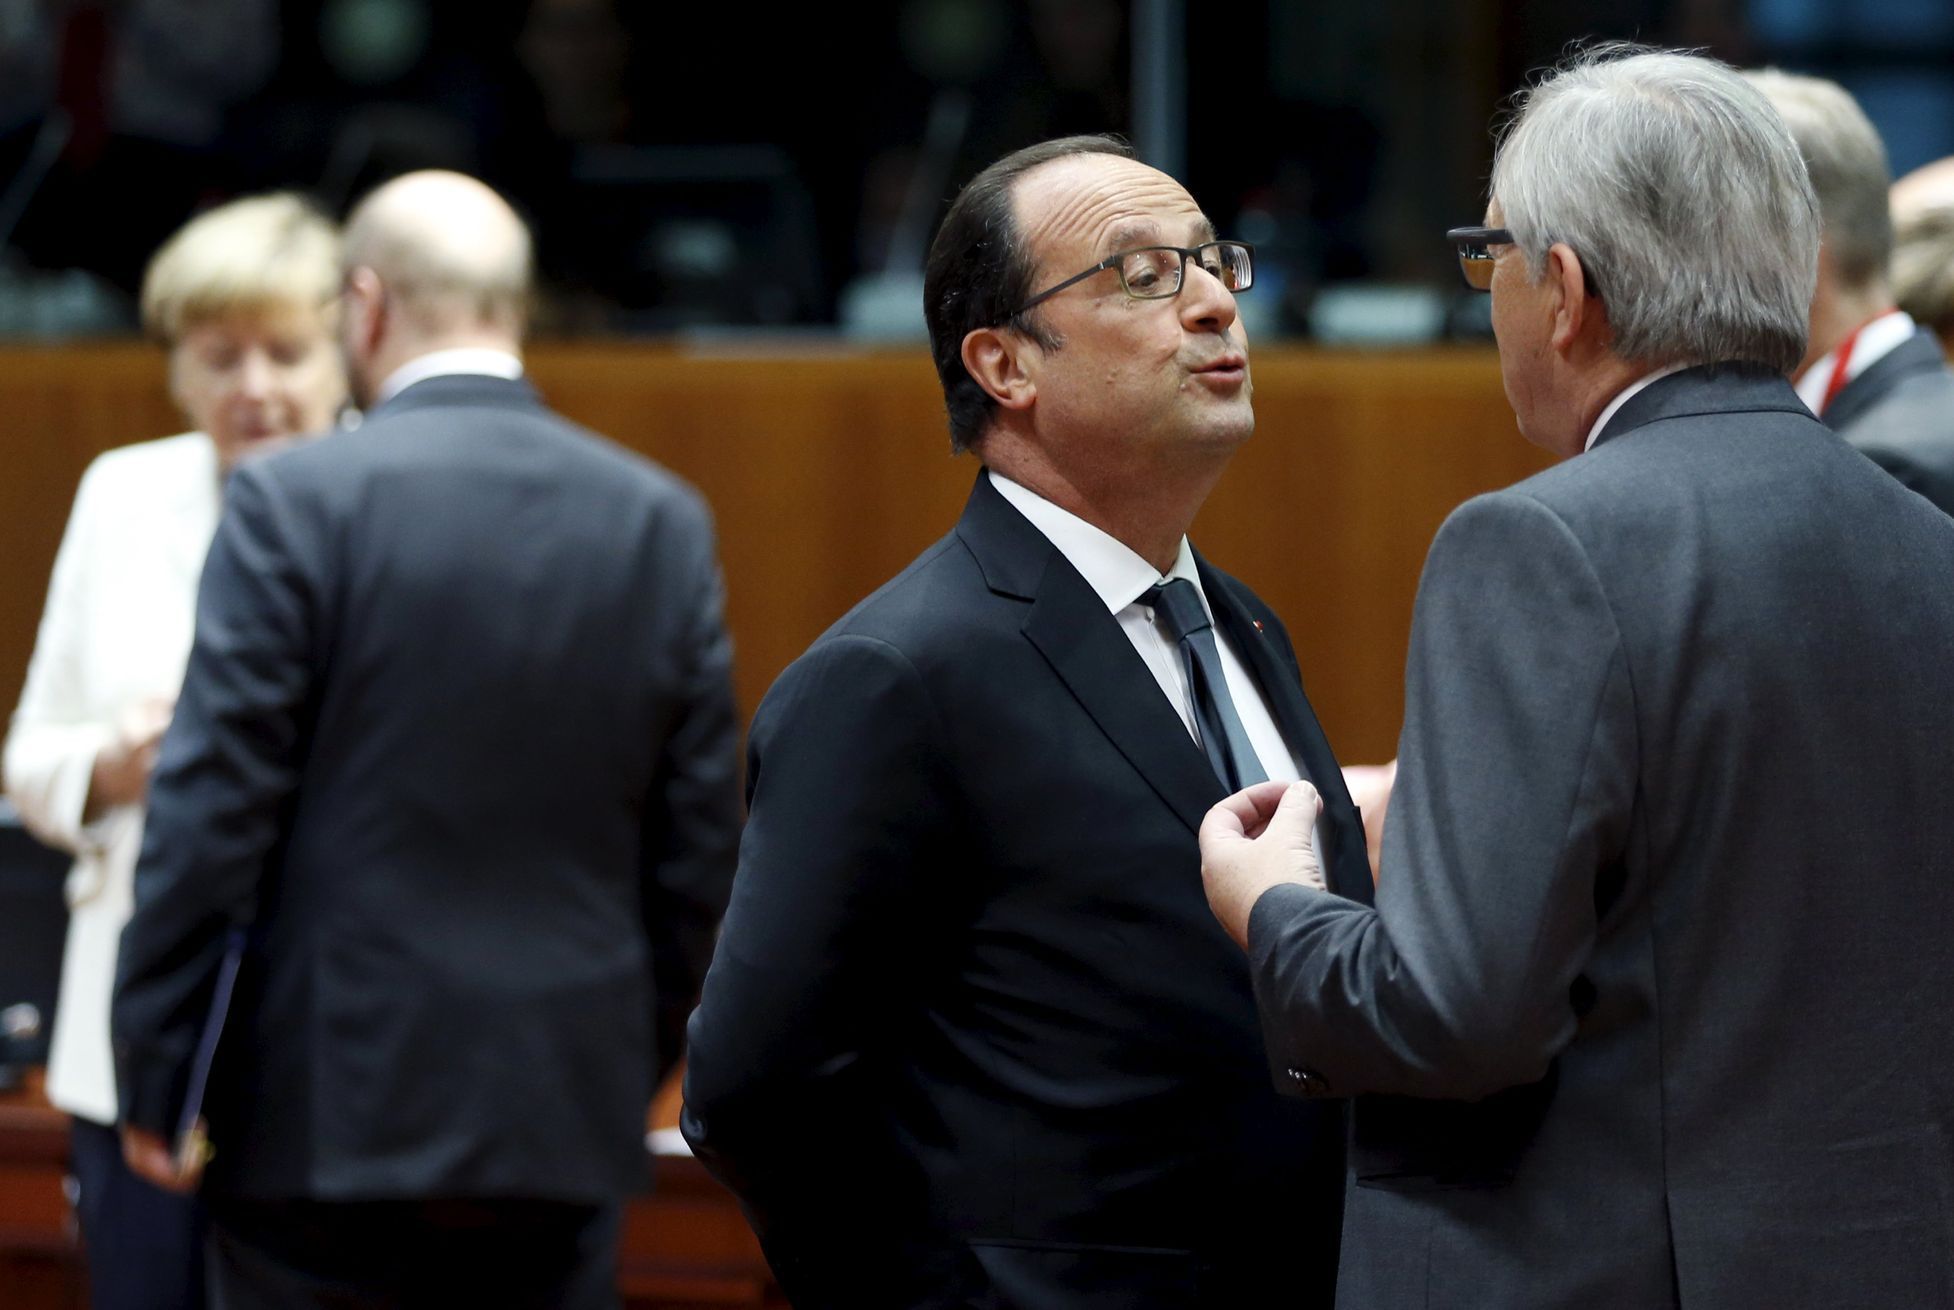 France's President Hollande talks to EU Commission President Juncker during an euro zone leaders summit in Brussels